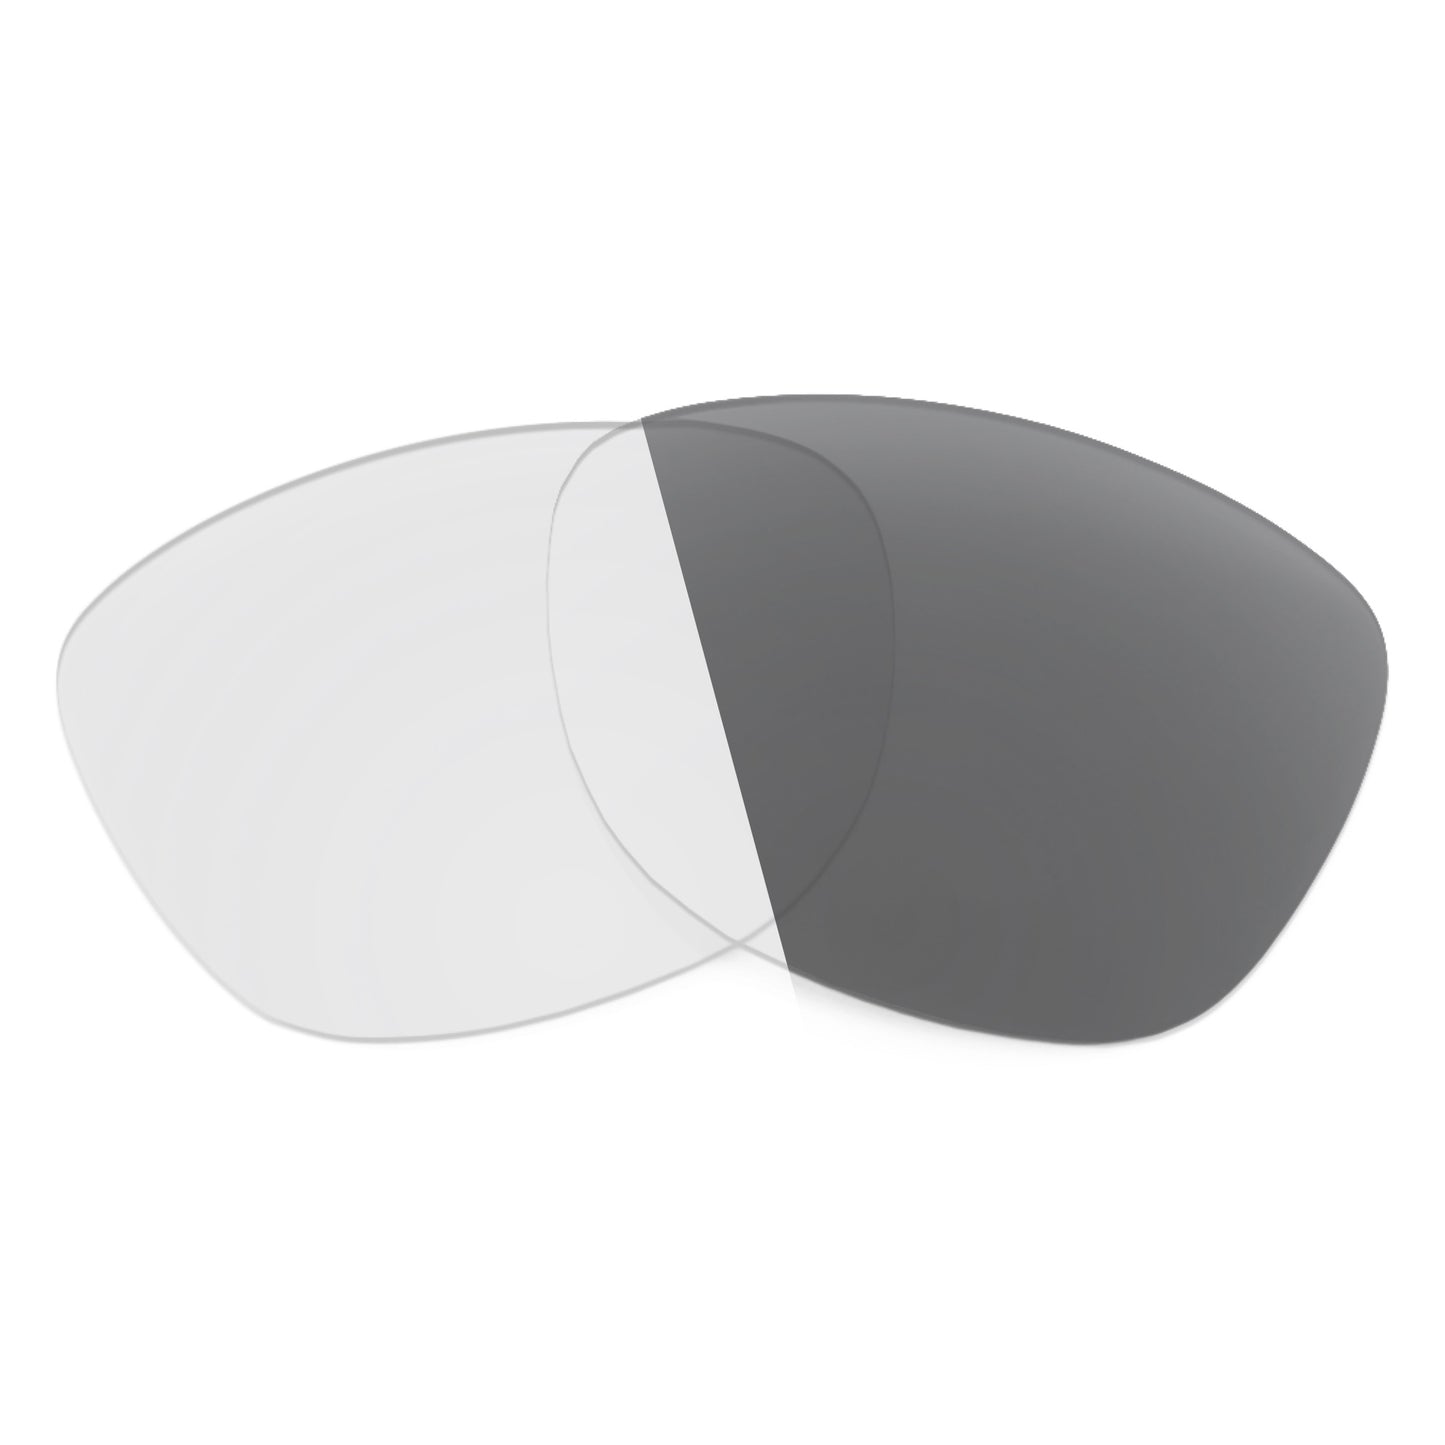 Revant replacement lenses for Ray-Ban Wayfarer Square RB2151 49mm Non-Polarized Adapt Gray Photochromic